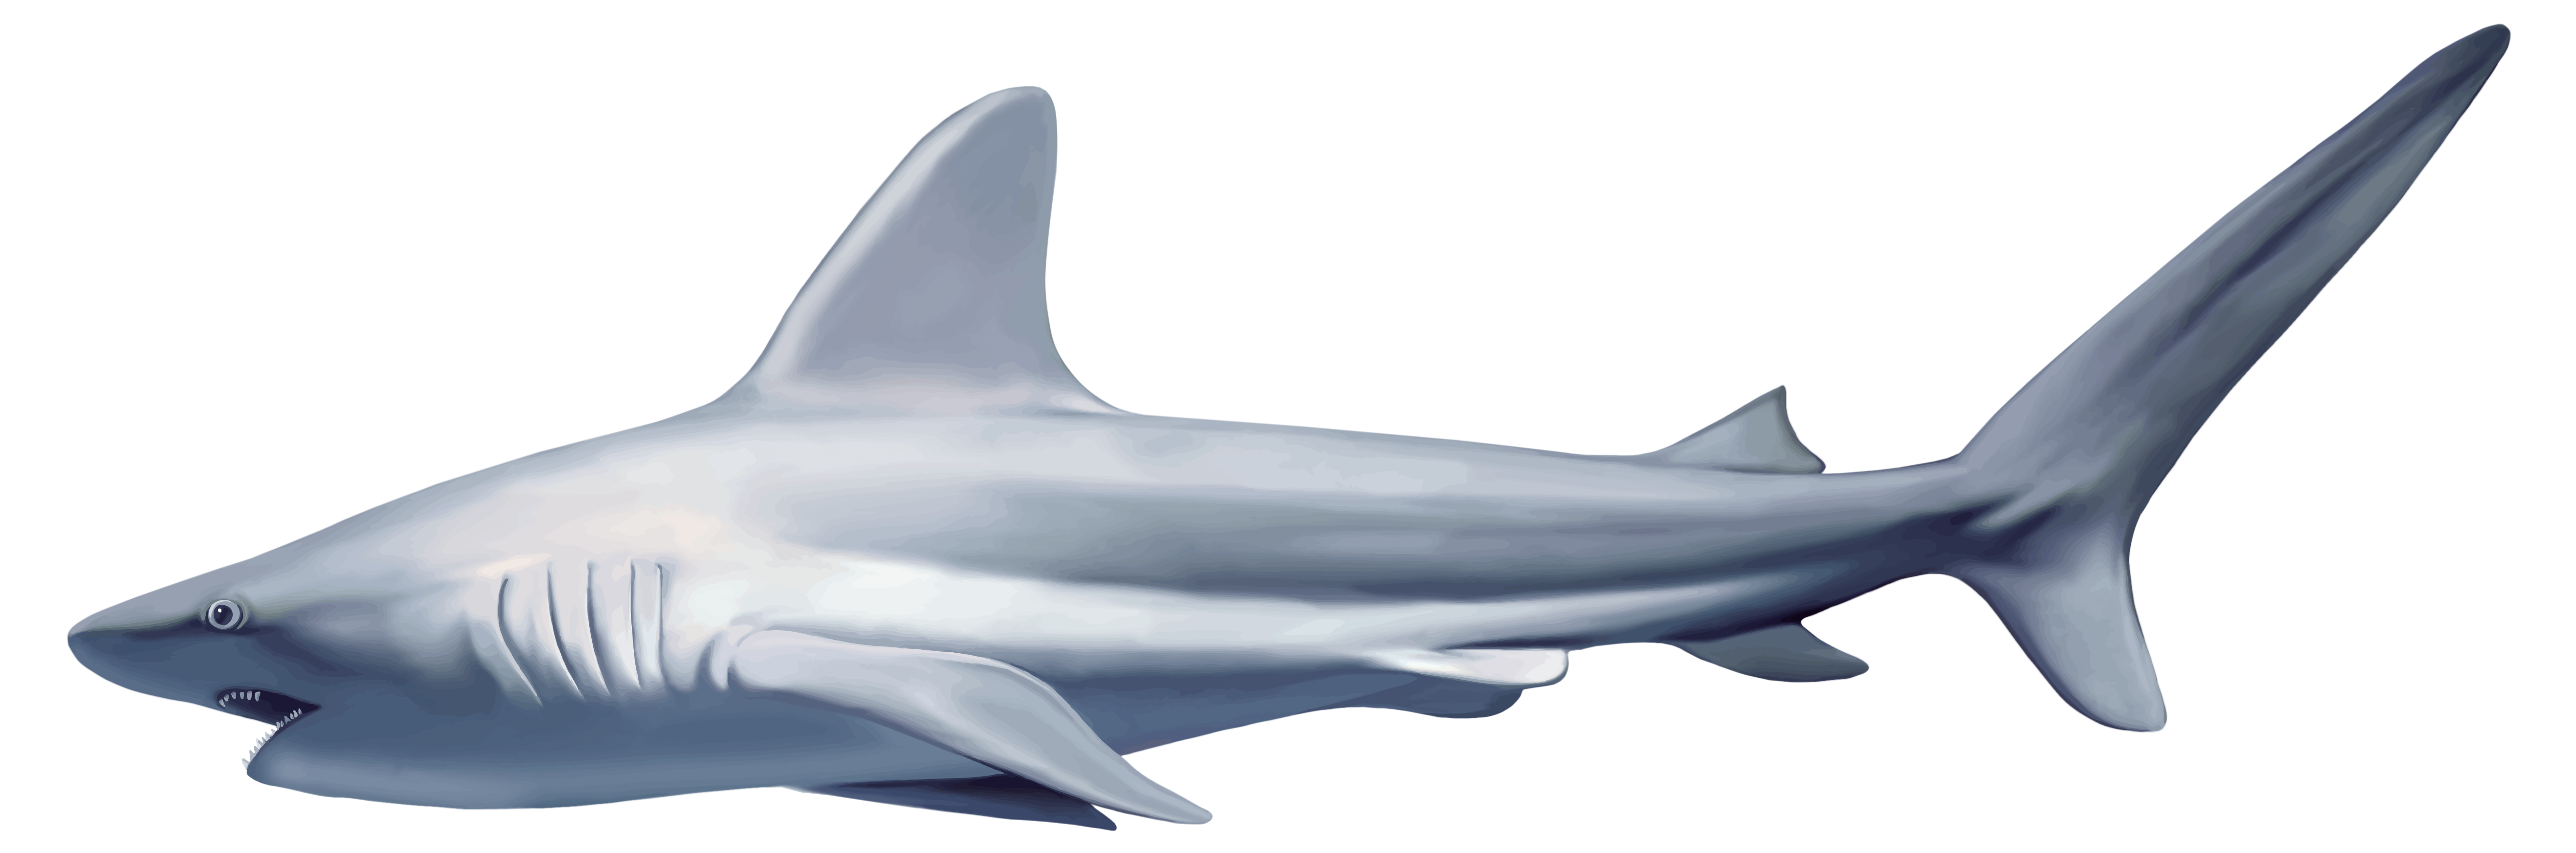 types of sharks clipart realistic